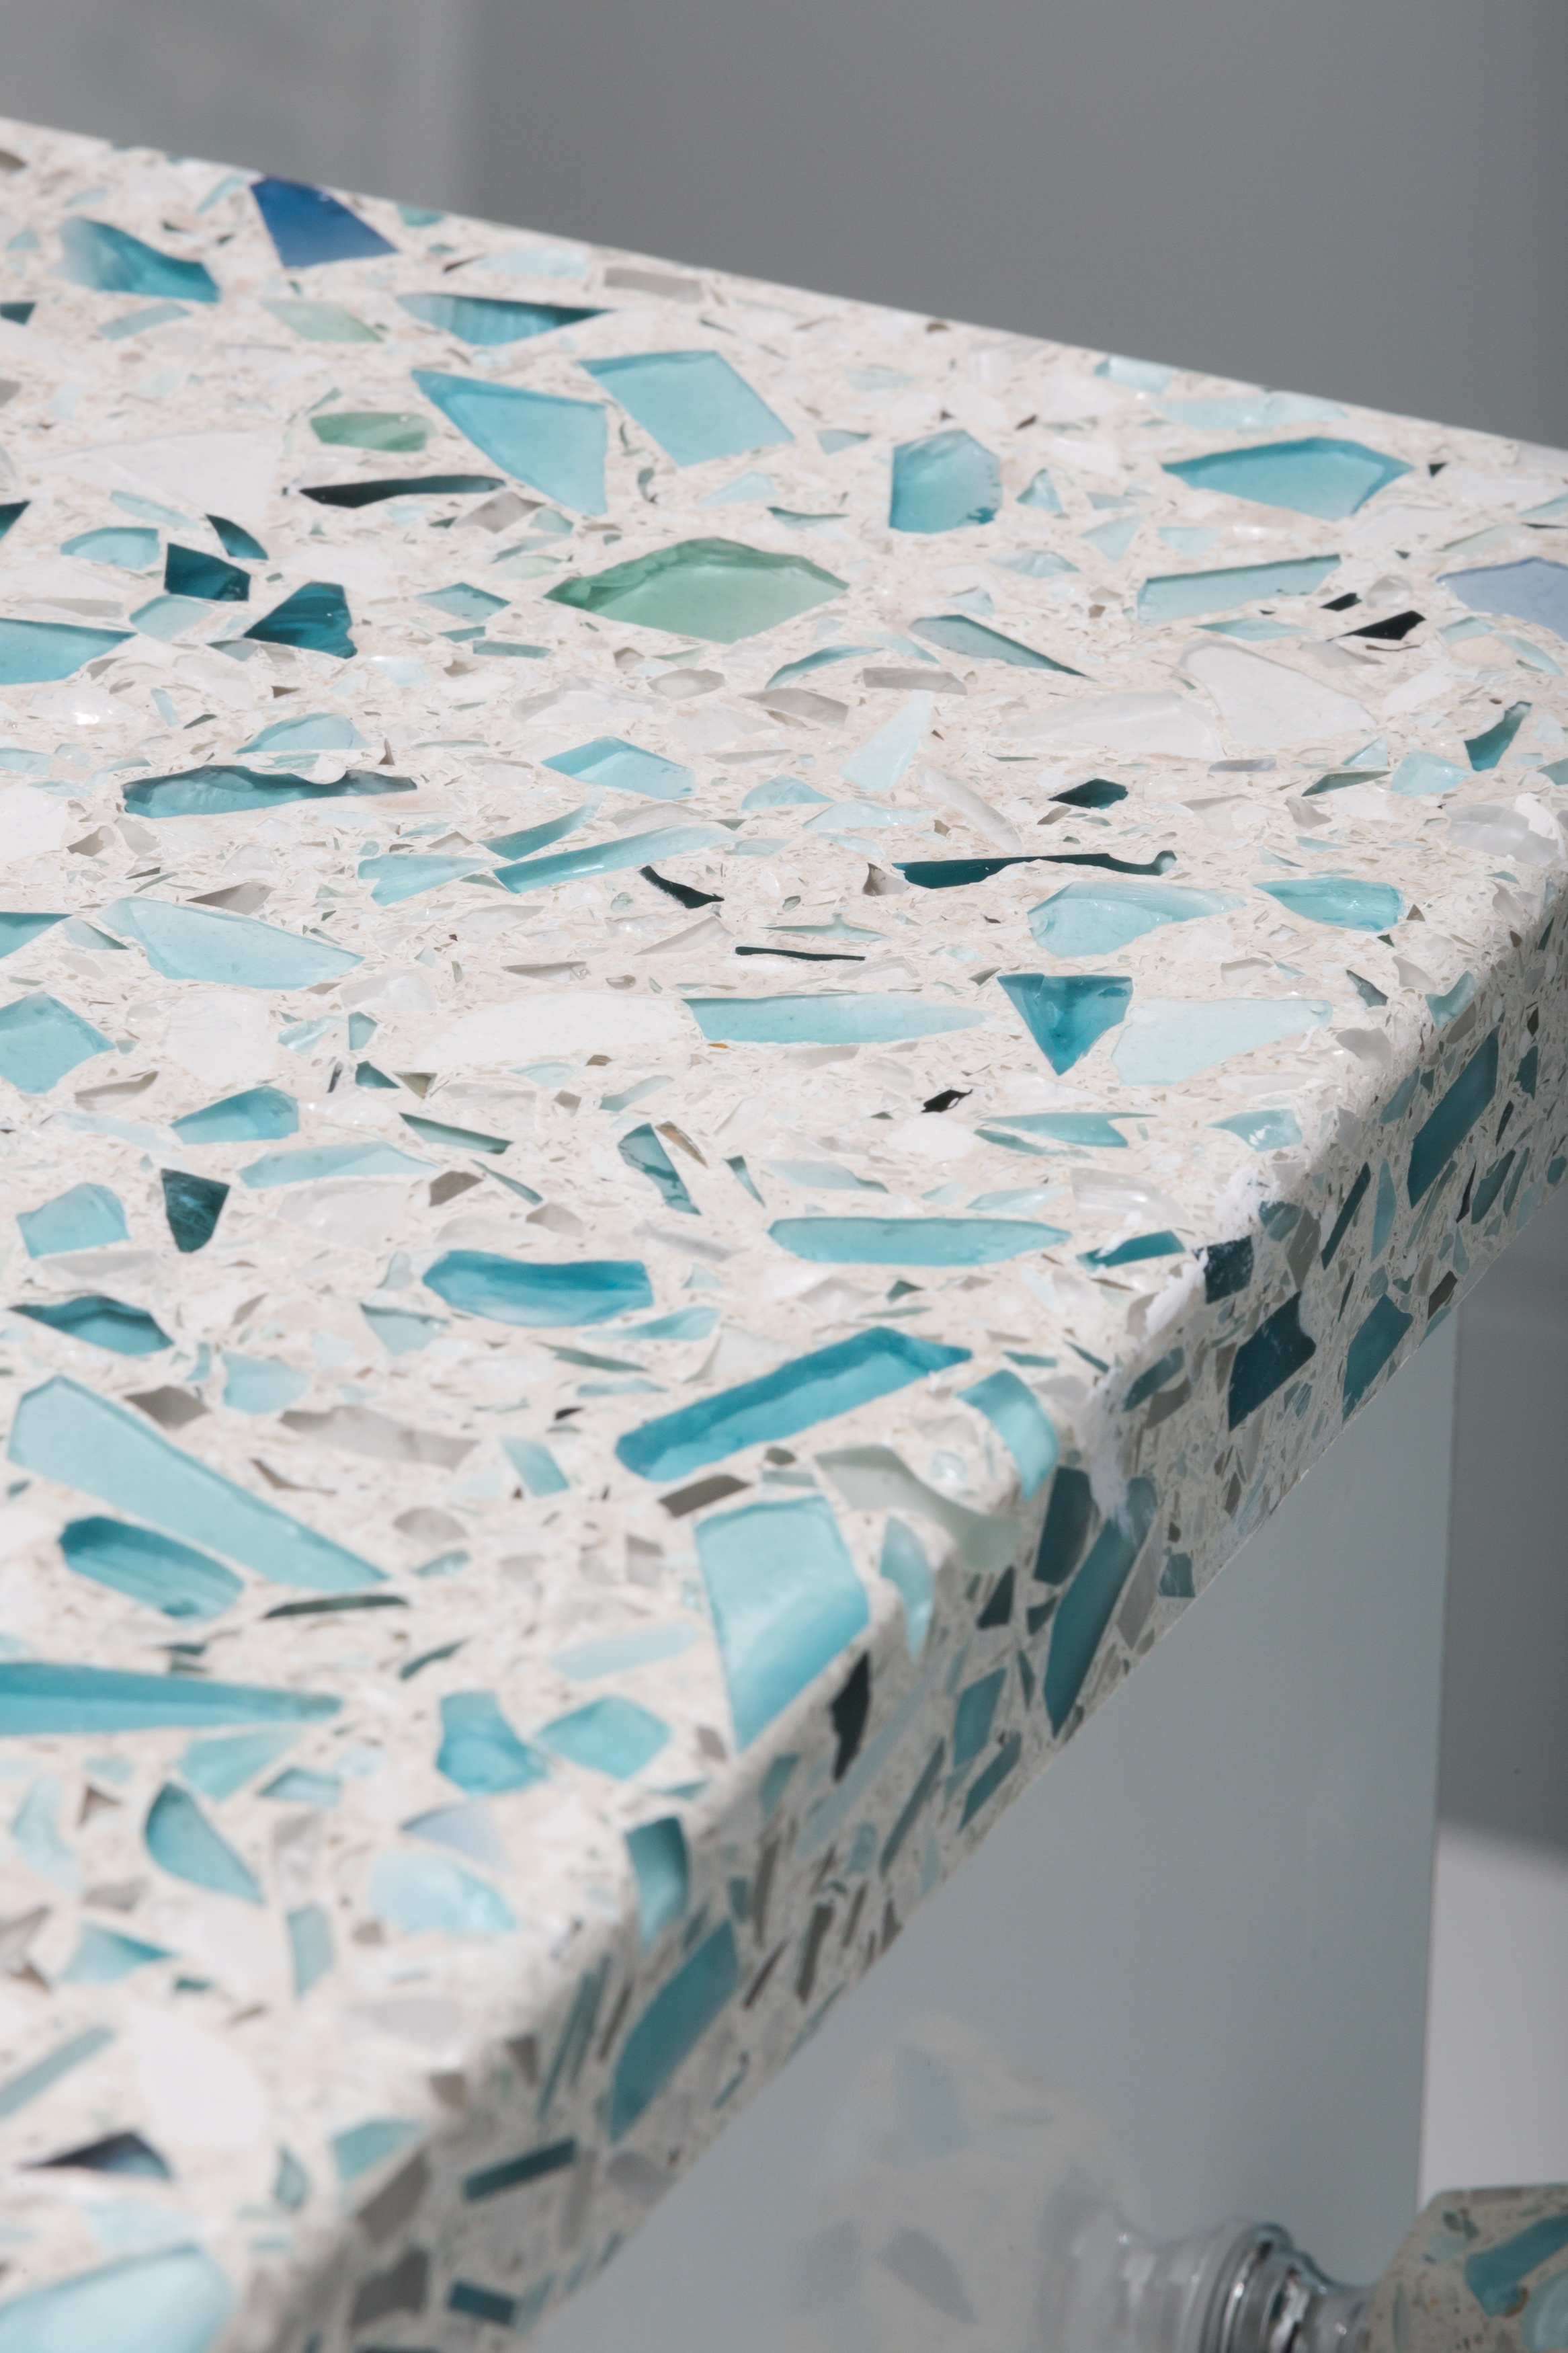 floating-blue-sea-pearl-finish-recycled-glass-countertop-vetrazzo